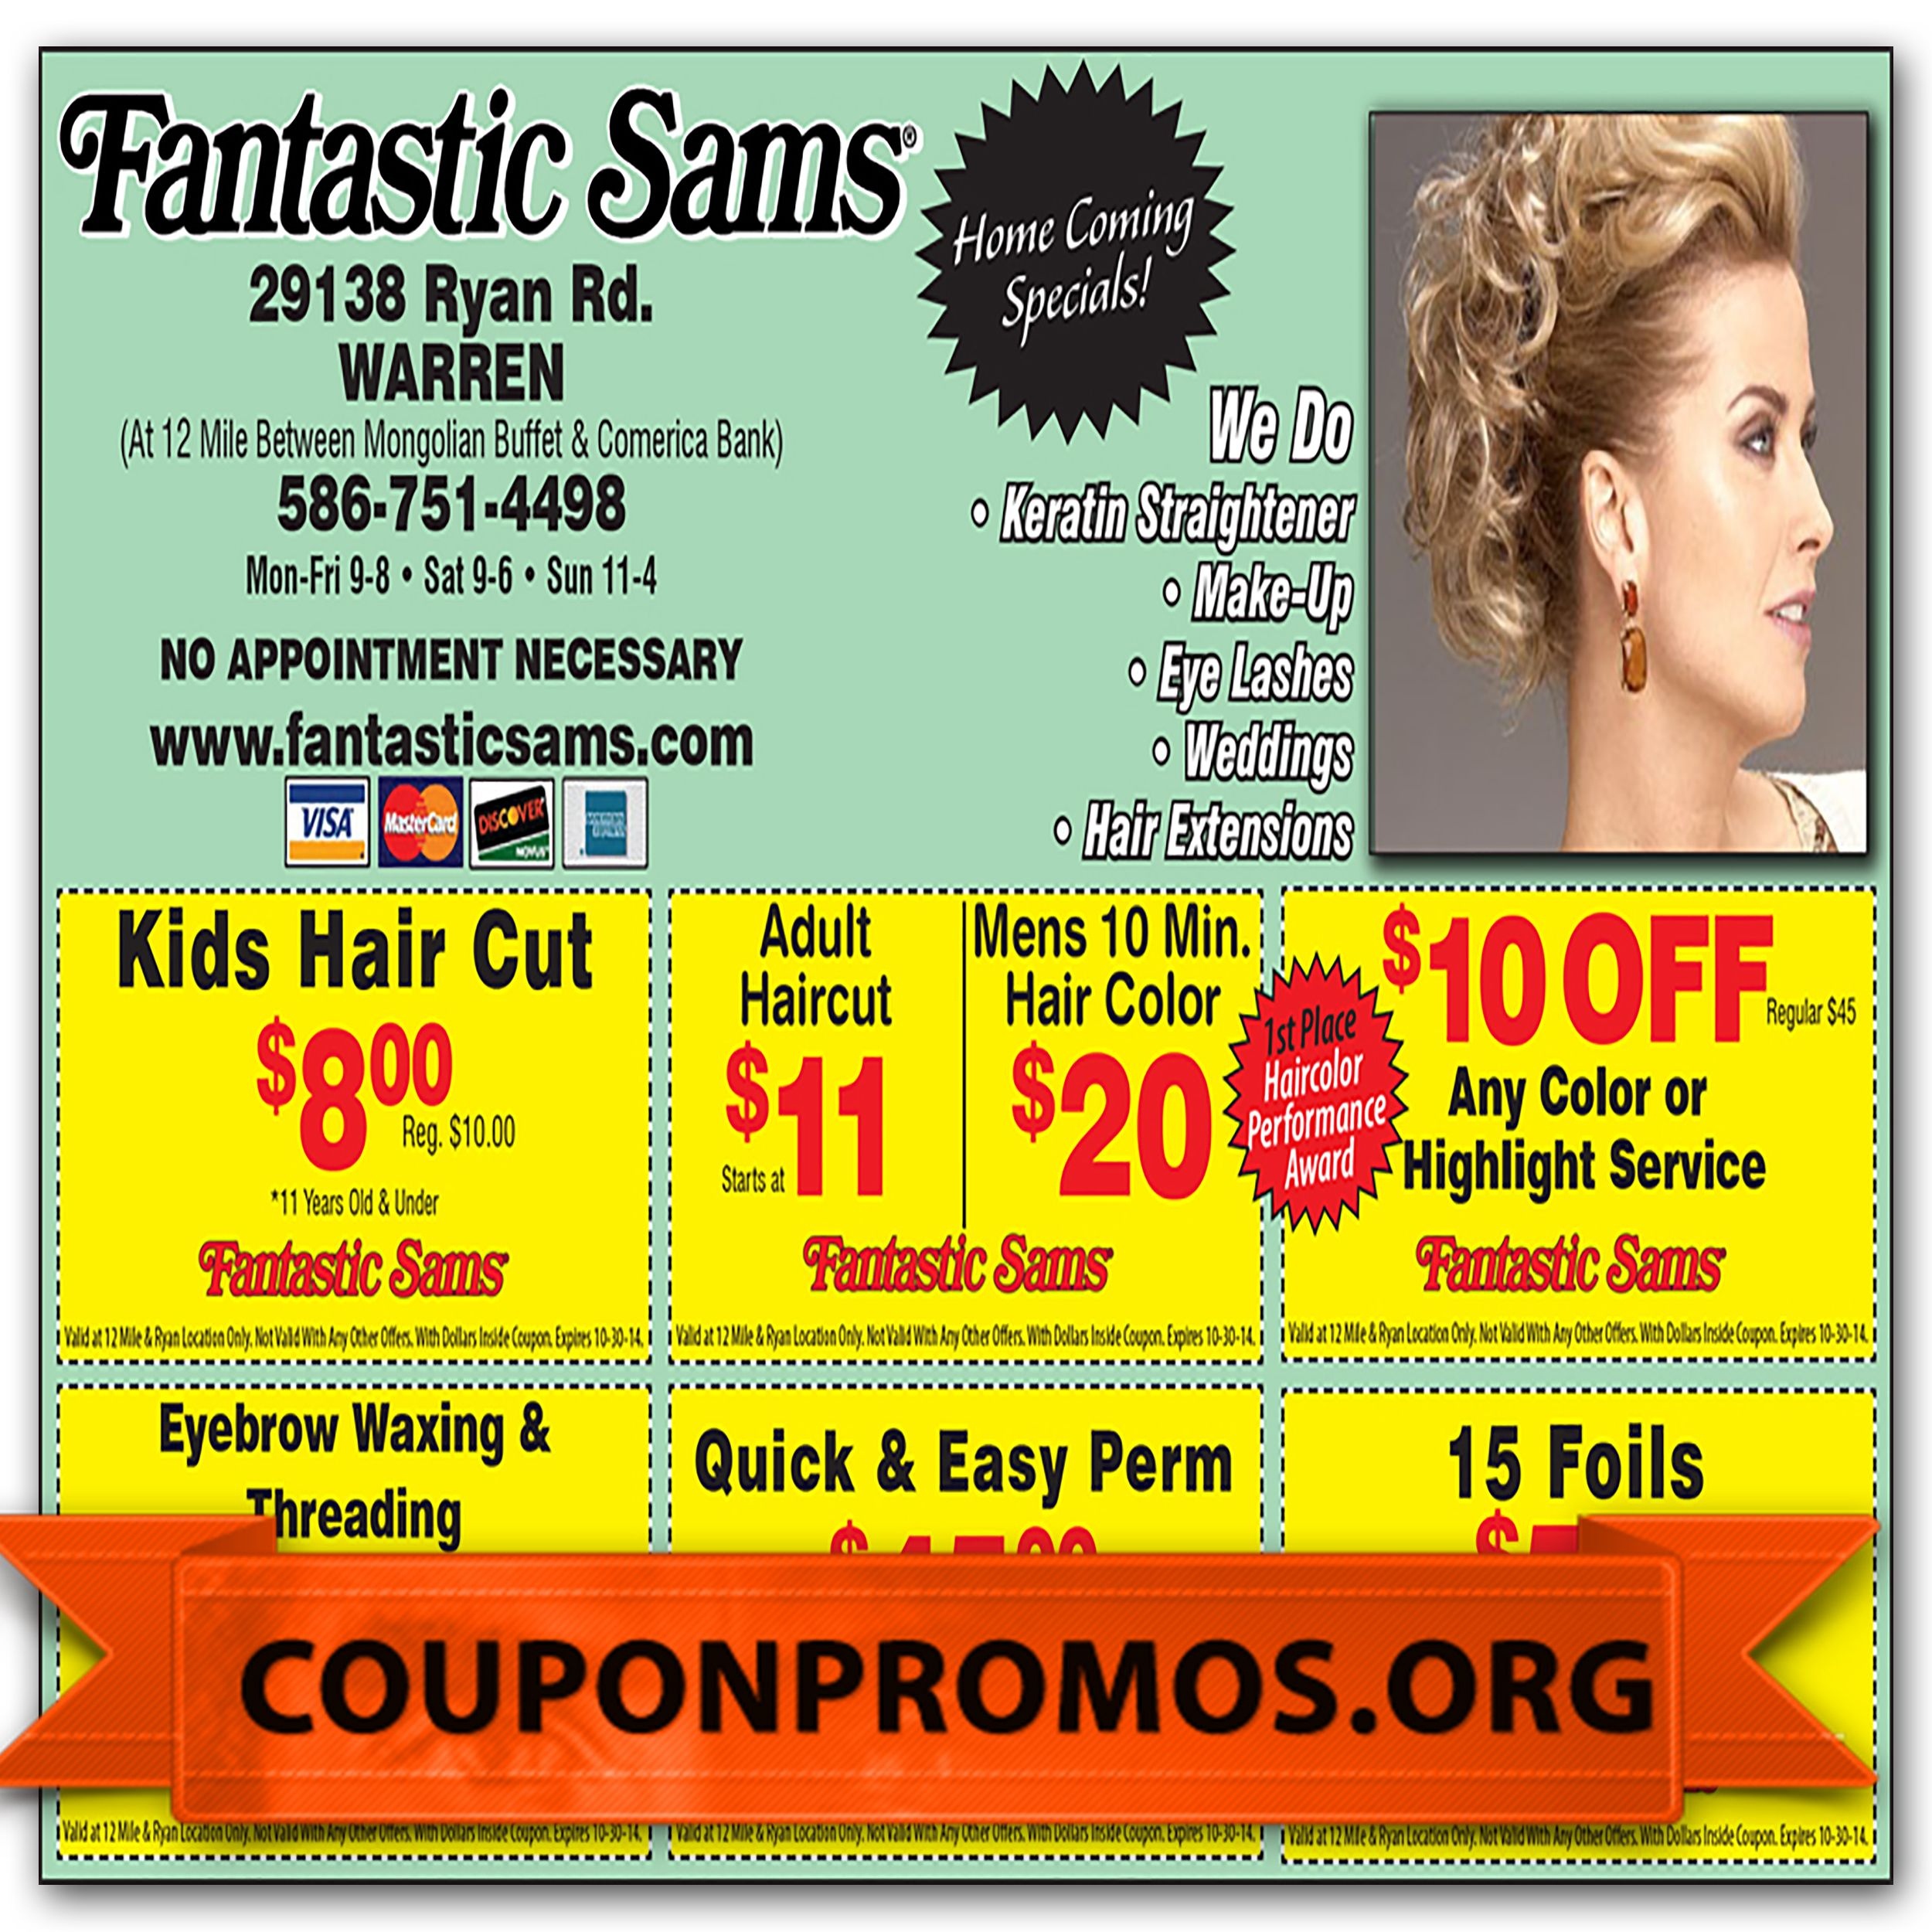 fantastic-sams-coupons-printable-75-images-in-collection-page-1